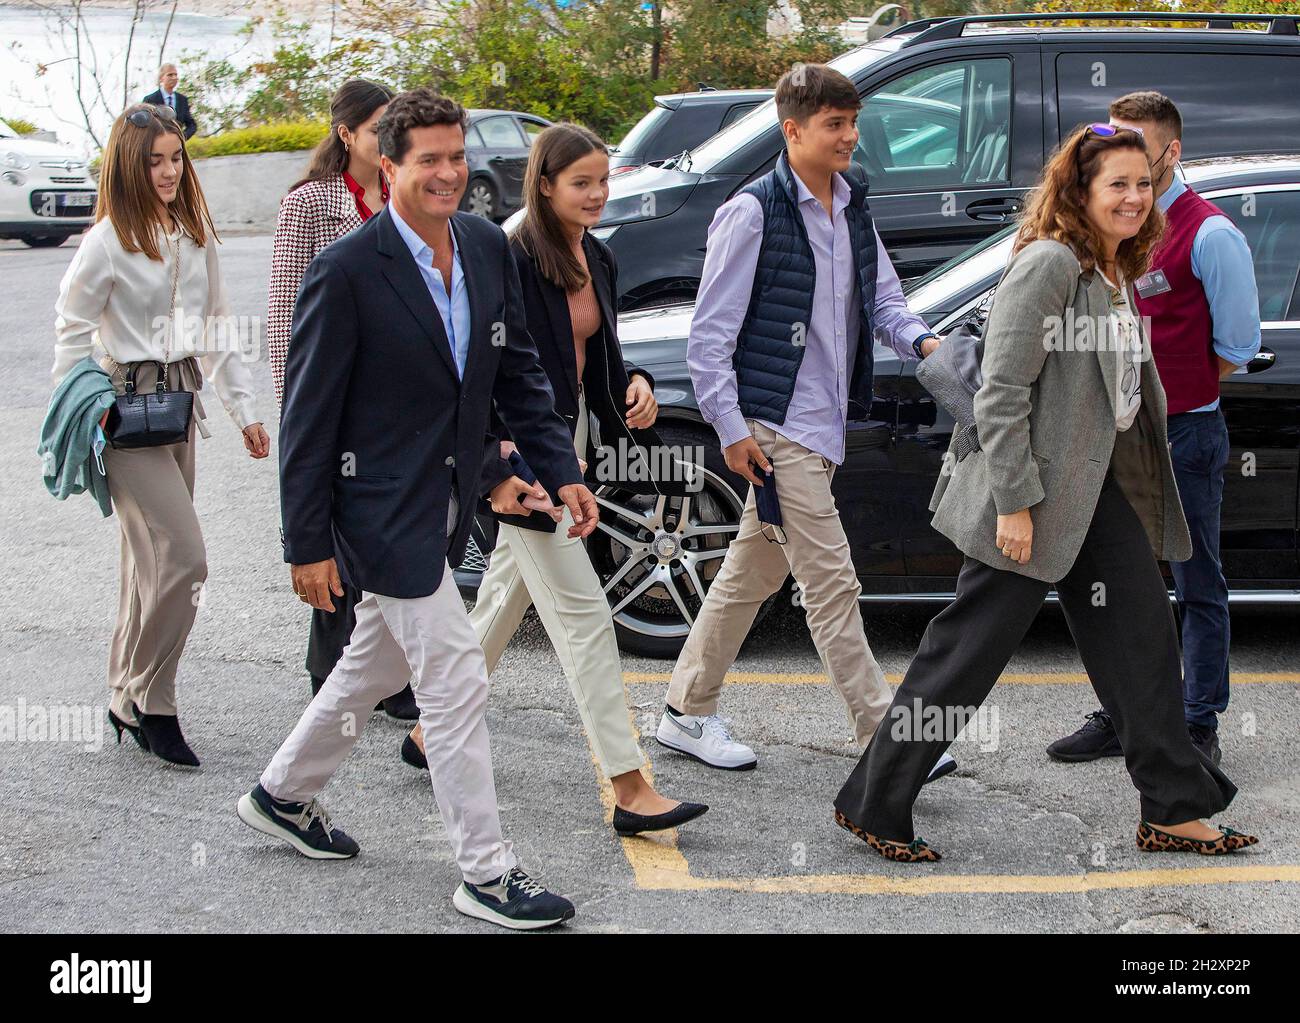 Athens, Griechenland. 24th Oct, 2021. Prince Alexia of Greece and Carlos  Morales Quintana Arrietta Morales y de Grecia Anna Maria Morales y de  Grecia Carlos Morales y de Grecia Amelia Morales y